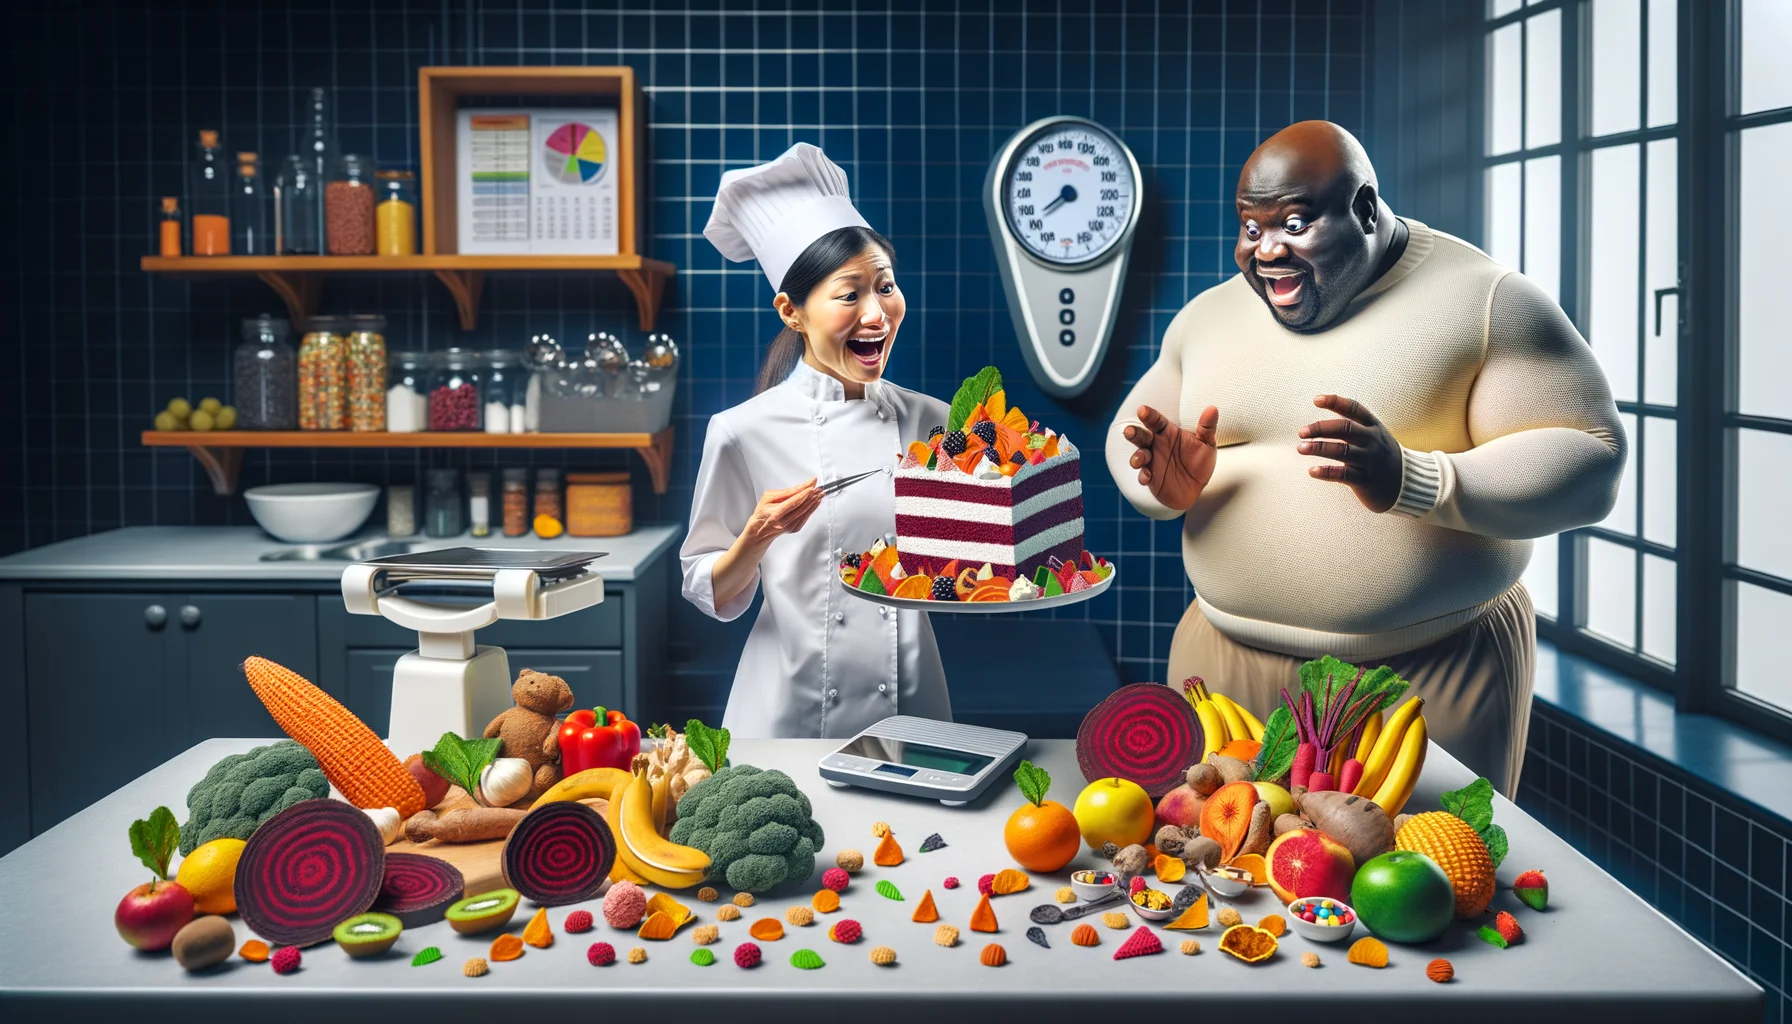 Imagine a humorous, highly realistic image that embodies the concept of 'Low-Calorie Treats for Obesity Management'. The scene takes place in a brightly lit, pristine and high-tech fitness kitchen. An Asian woman in a chef's outfit is animatedly presenting a tray of colorful, aesthetically dry fruits, vegetables, and low-glycemic-index food items shaped like sweets and cakes. There are weight-scales, measuring tapes, nutrition guide books scattered around. A bulky African man in a gym outfit is eagerly examining a beetroot chocolate cake slice with a magnifying glass. His expression is a mixture of curiosity and awe.